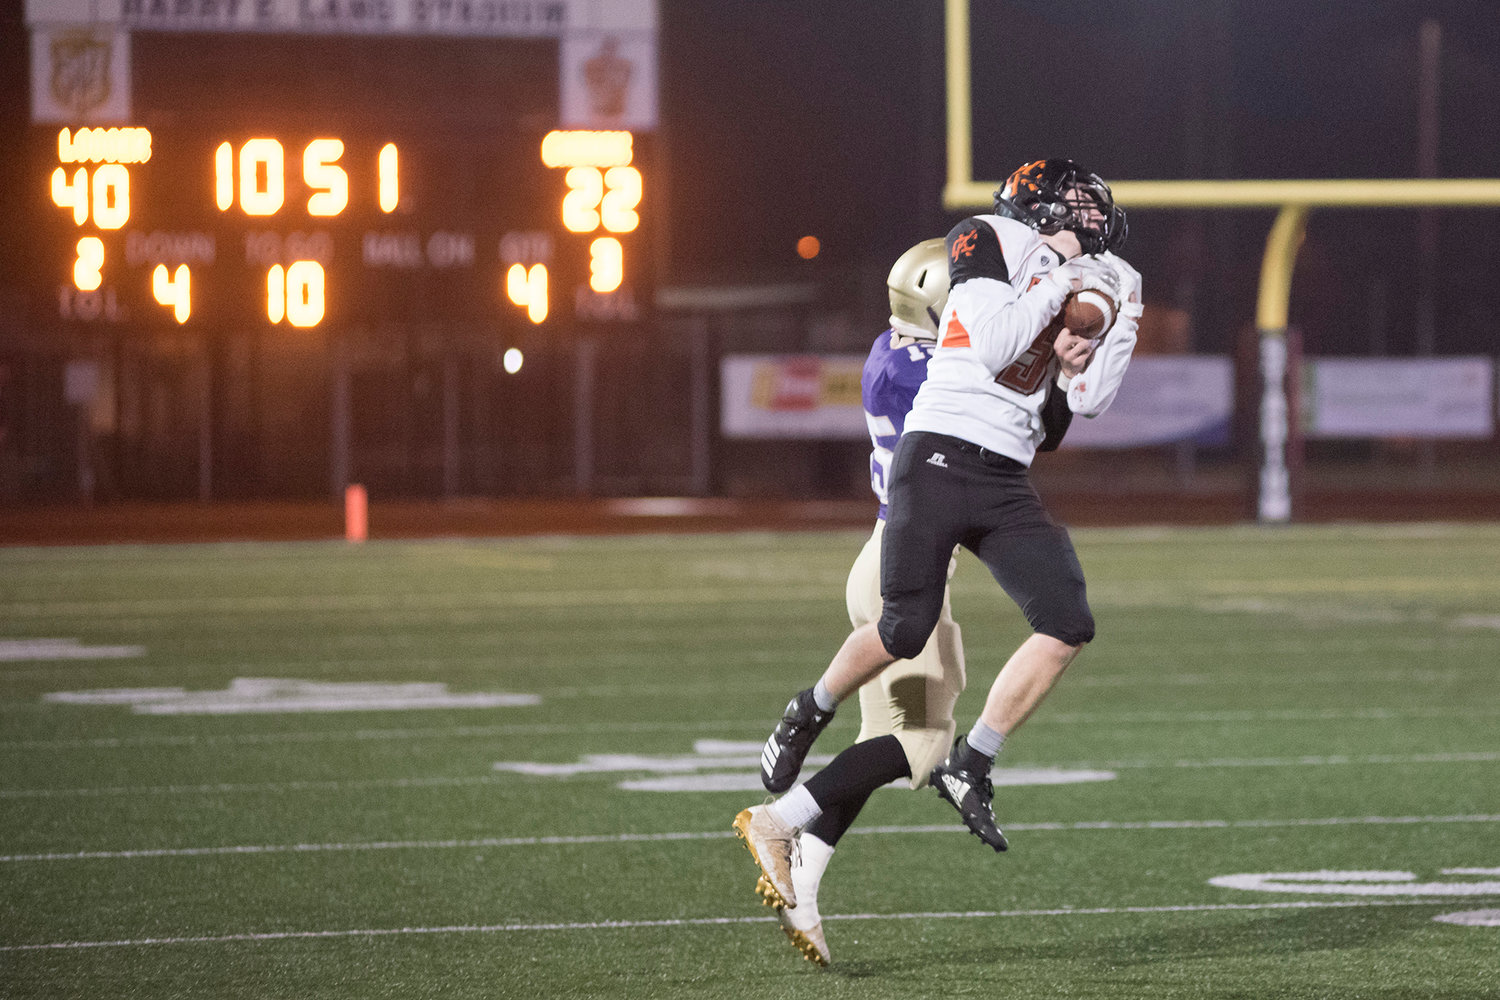 Images from the State 2B Championship football game between Onalaska and Kalama at Harry Lang Stadium in Lakewood on Saturday, Dec. 7, 2019.